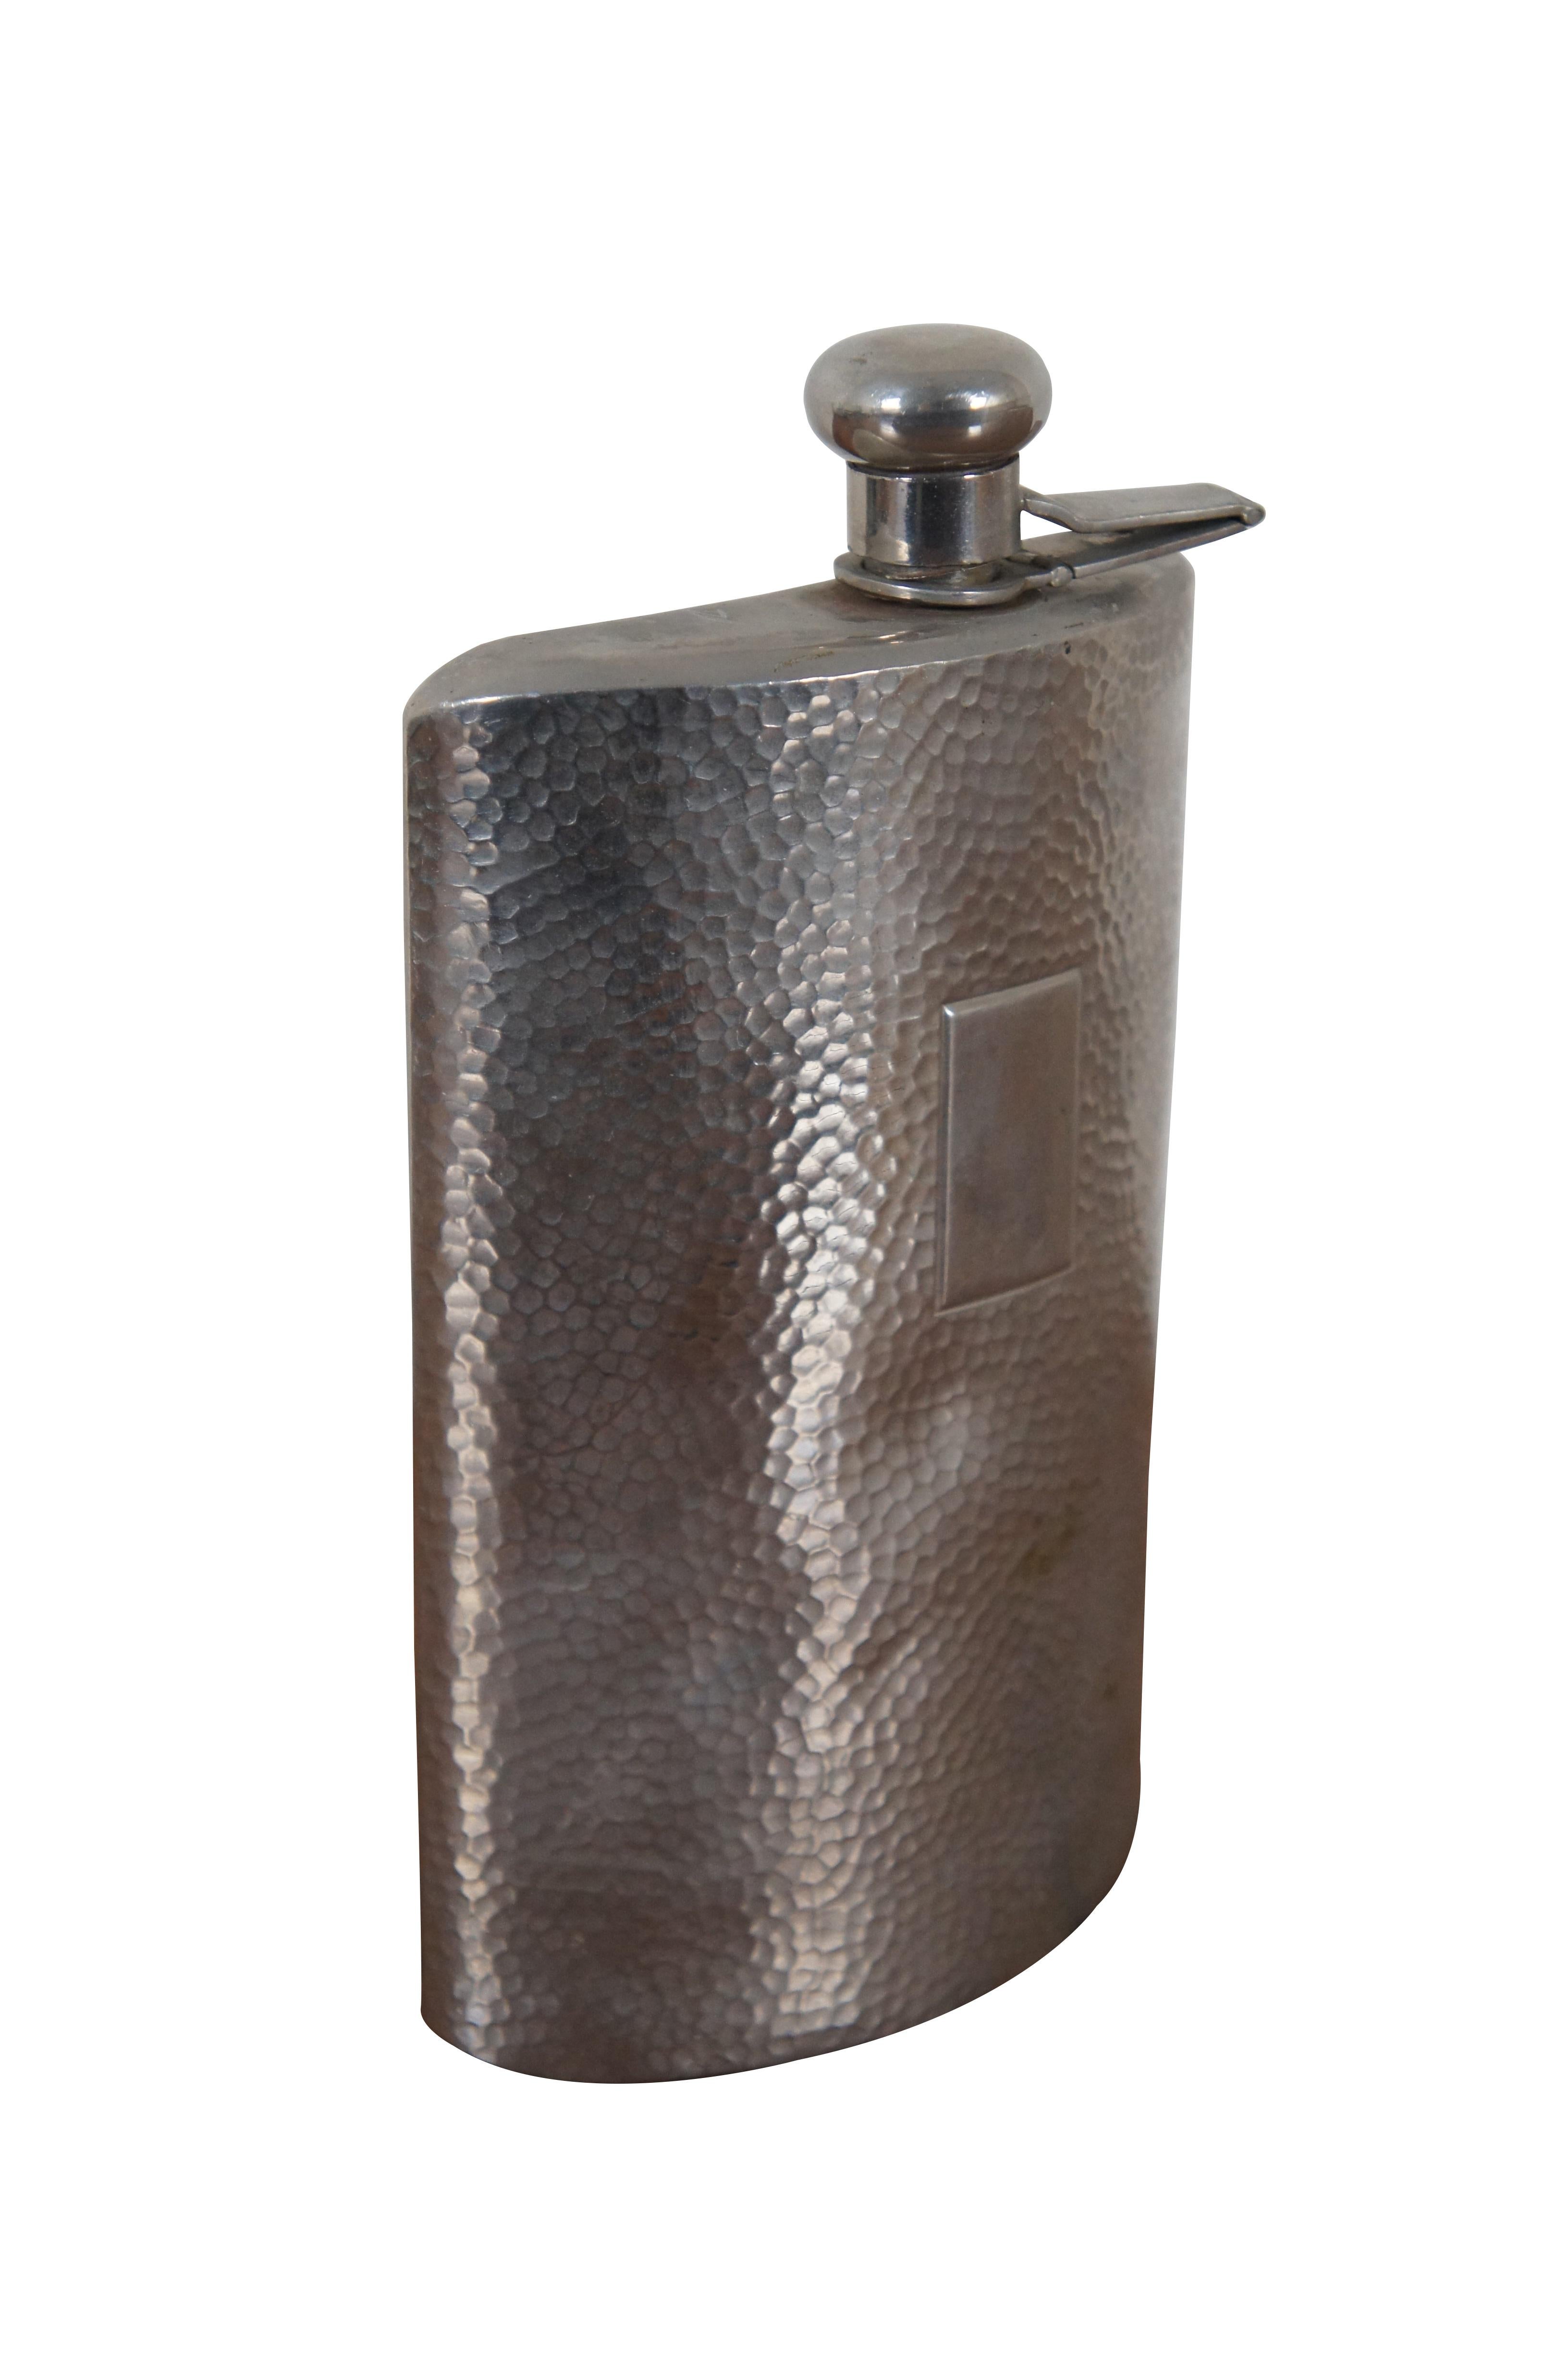 Antique hammered silverplate large hip flask with cork lined flip top and rectangular panel on the front for a monogram. Marked Germany on base. Triangular mark on lid hinge.

Dimensions:
3.75